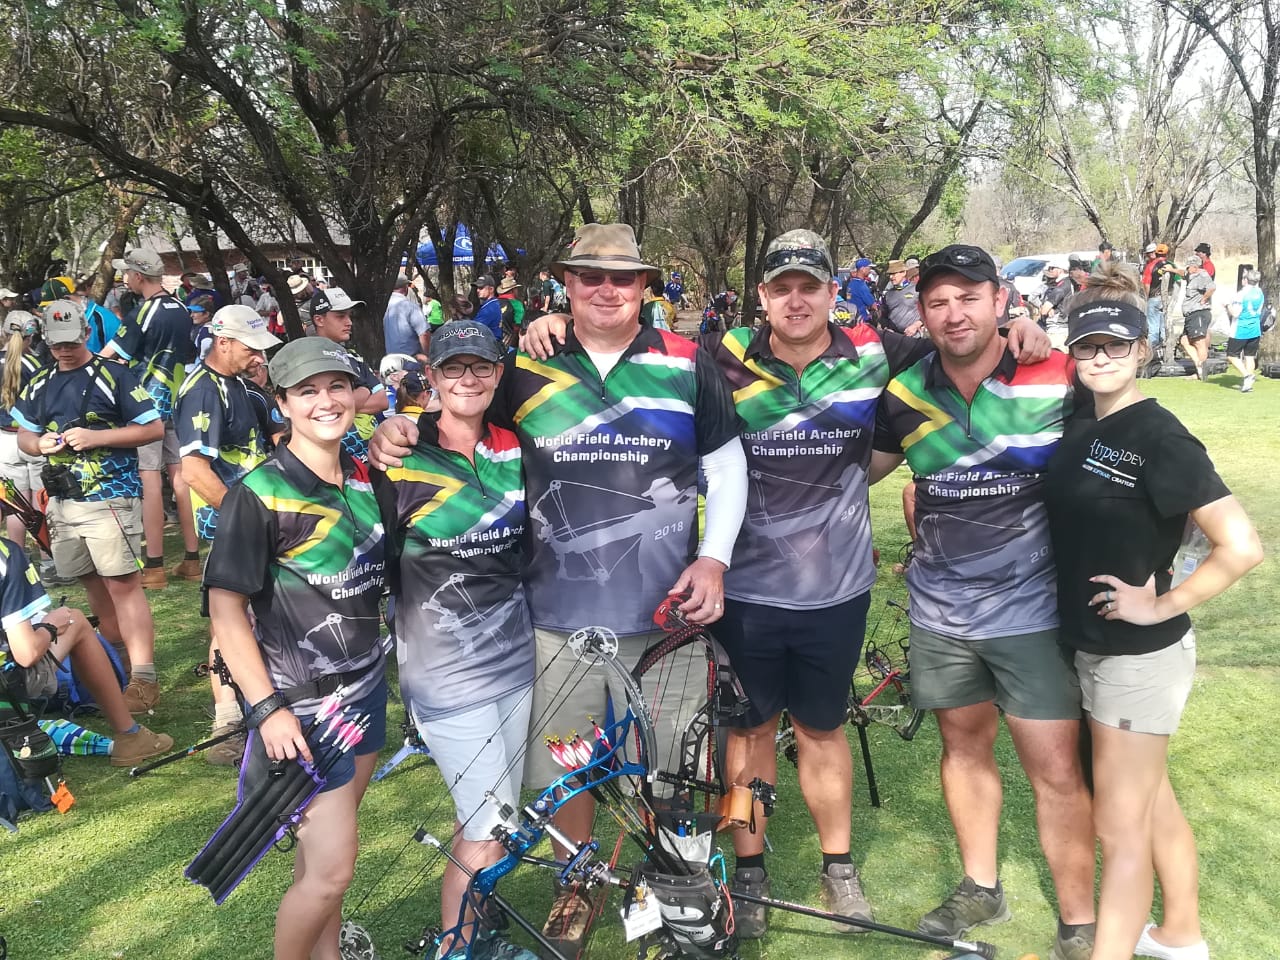 Polygraph Examiners representing South Africa at the International Field Archery Association World Field Archery Championship 2018